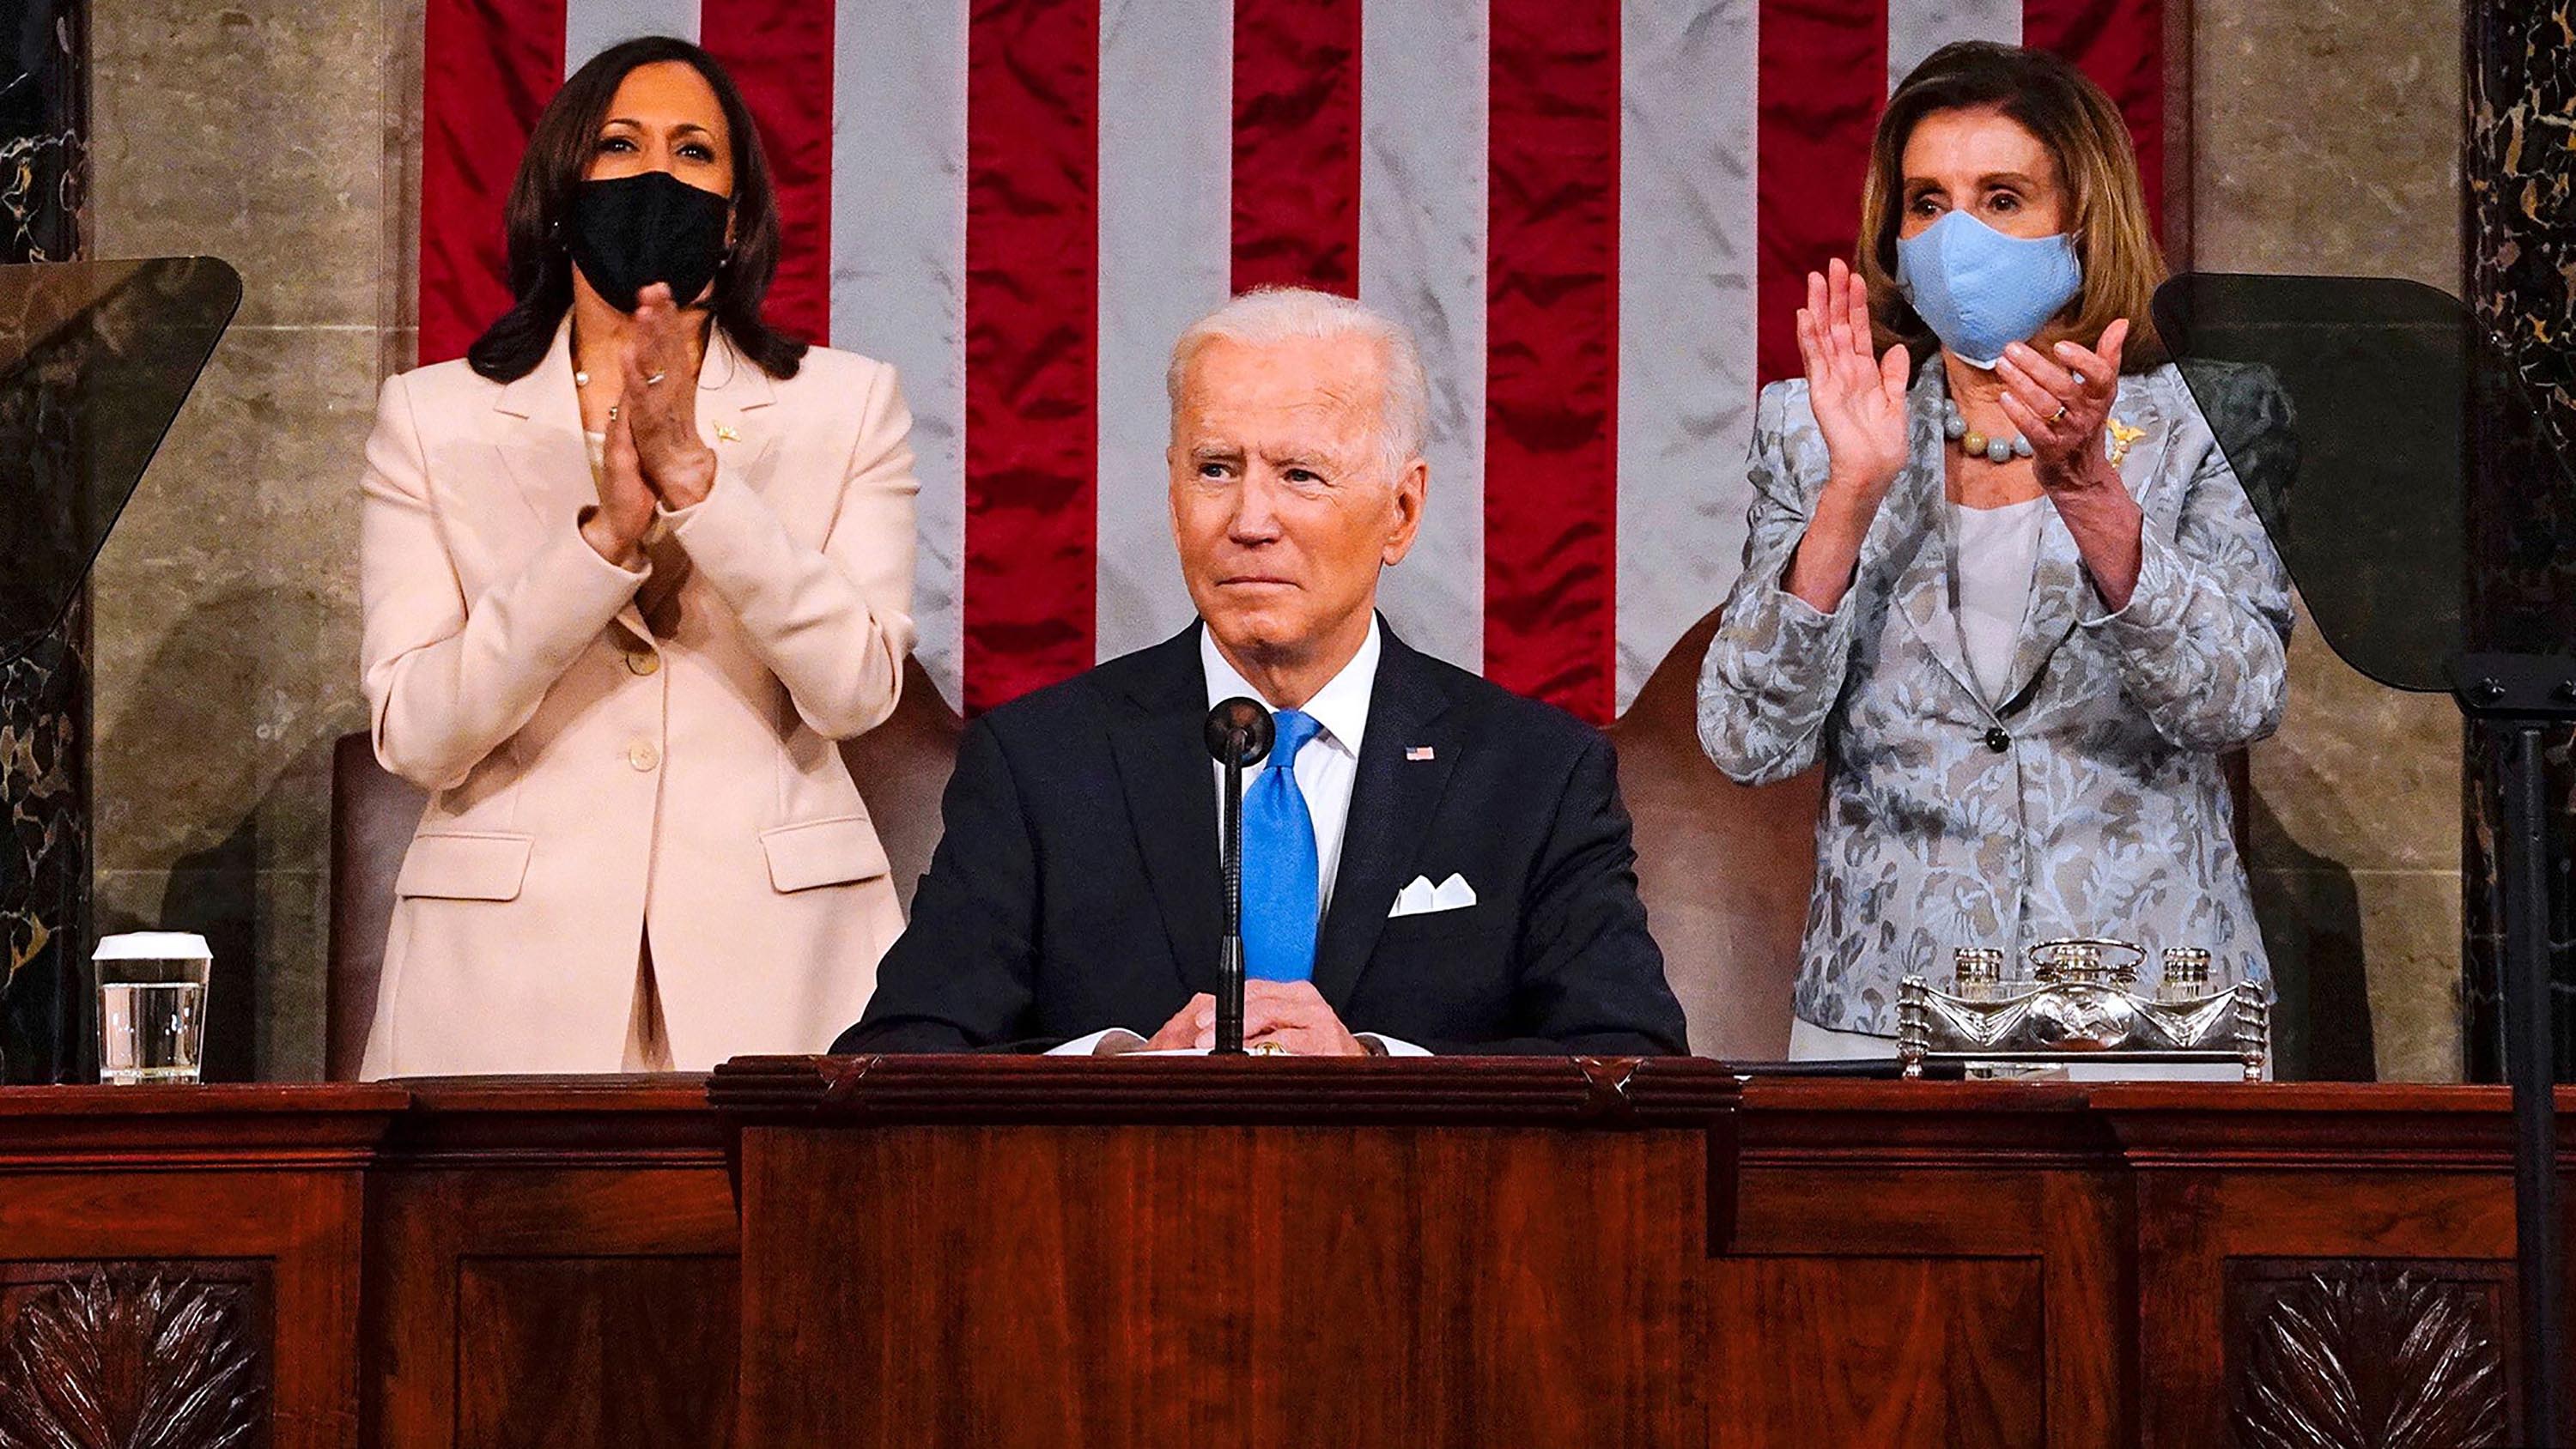 President Joe Biden addresses a joint session of Congress in front of Vice President Kamala Harris and House Speaker Nancy Pelosi on Wednesday, April 28. "Madam speaker, madam vice president. No president has ever said those words from this podium. No president has ever said those words. And it's about time," Biden said.